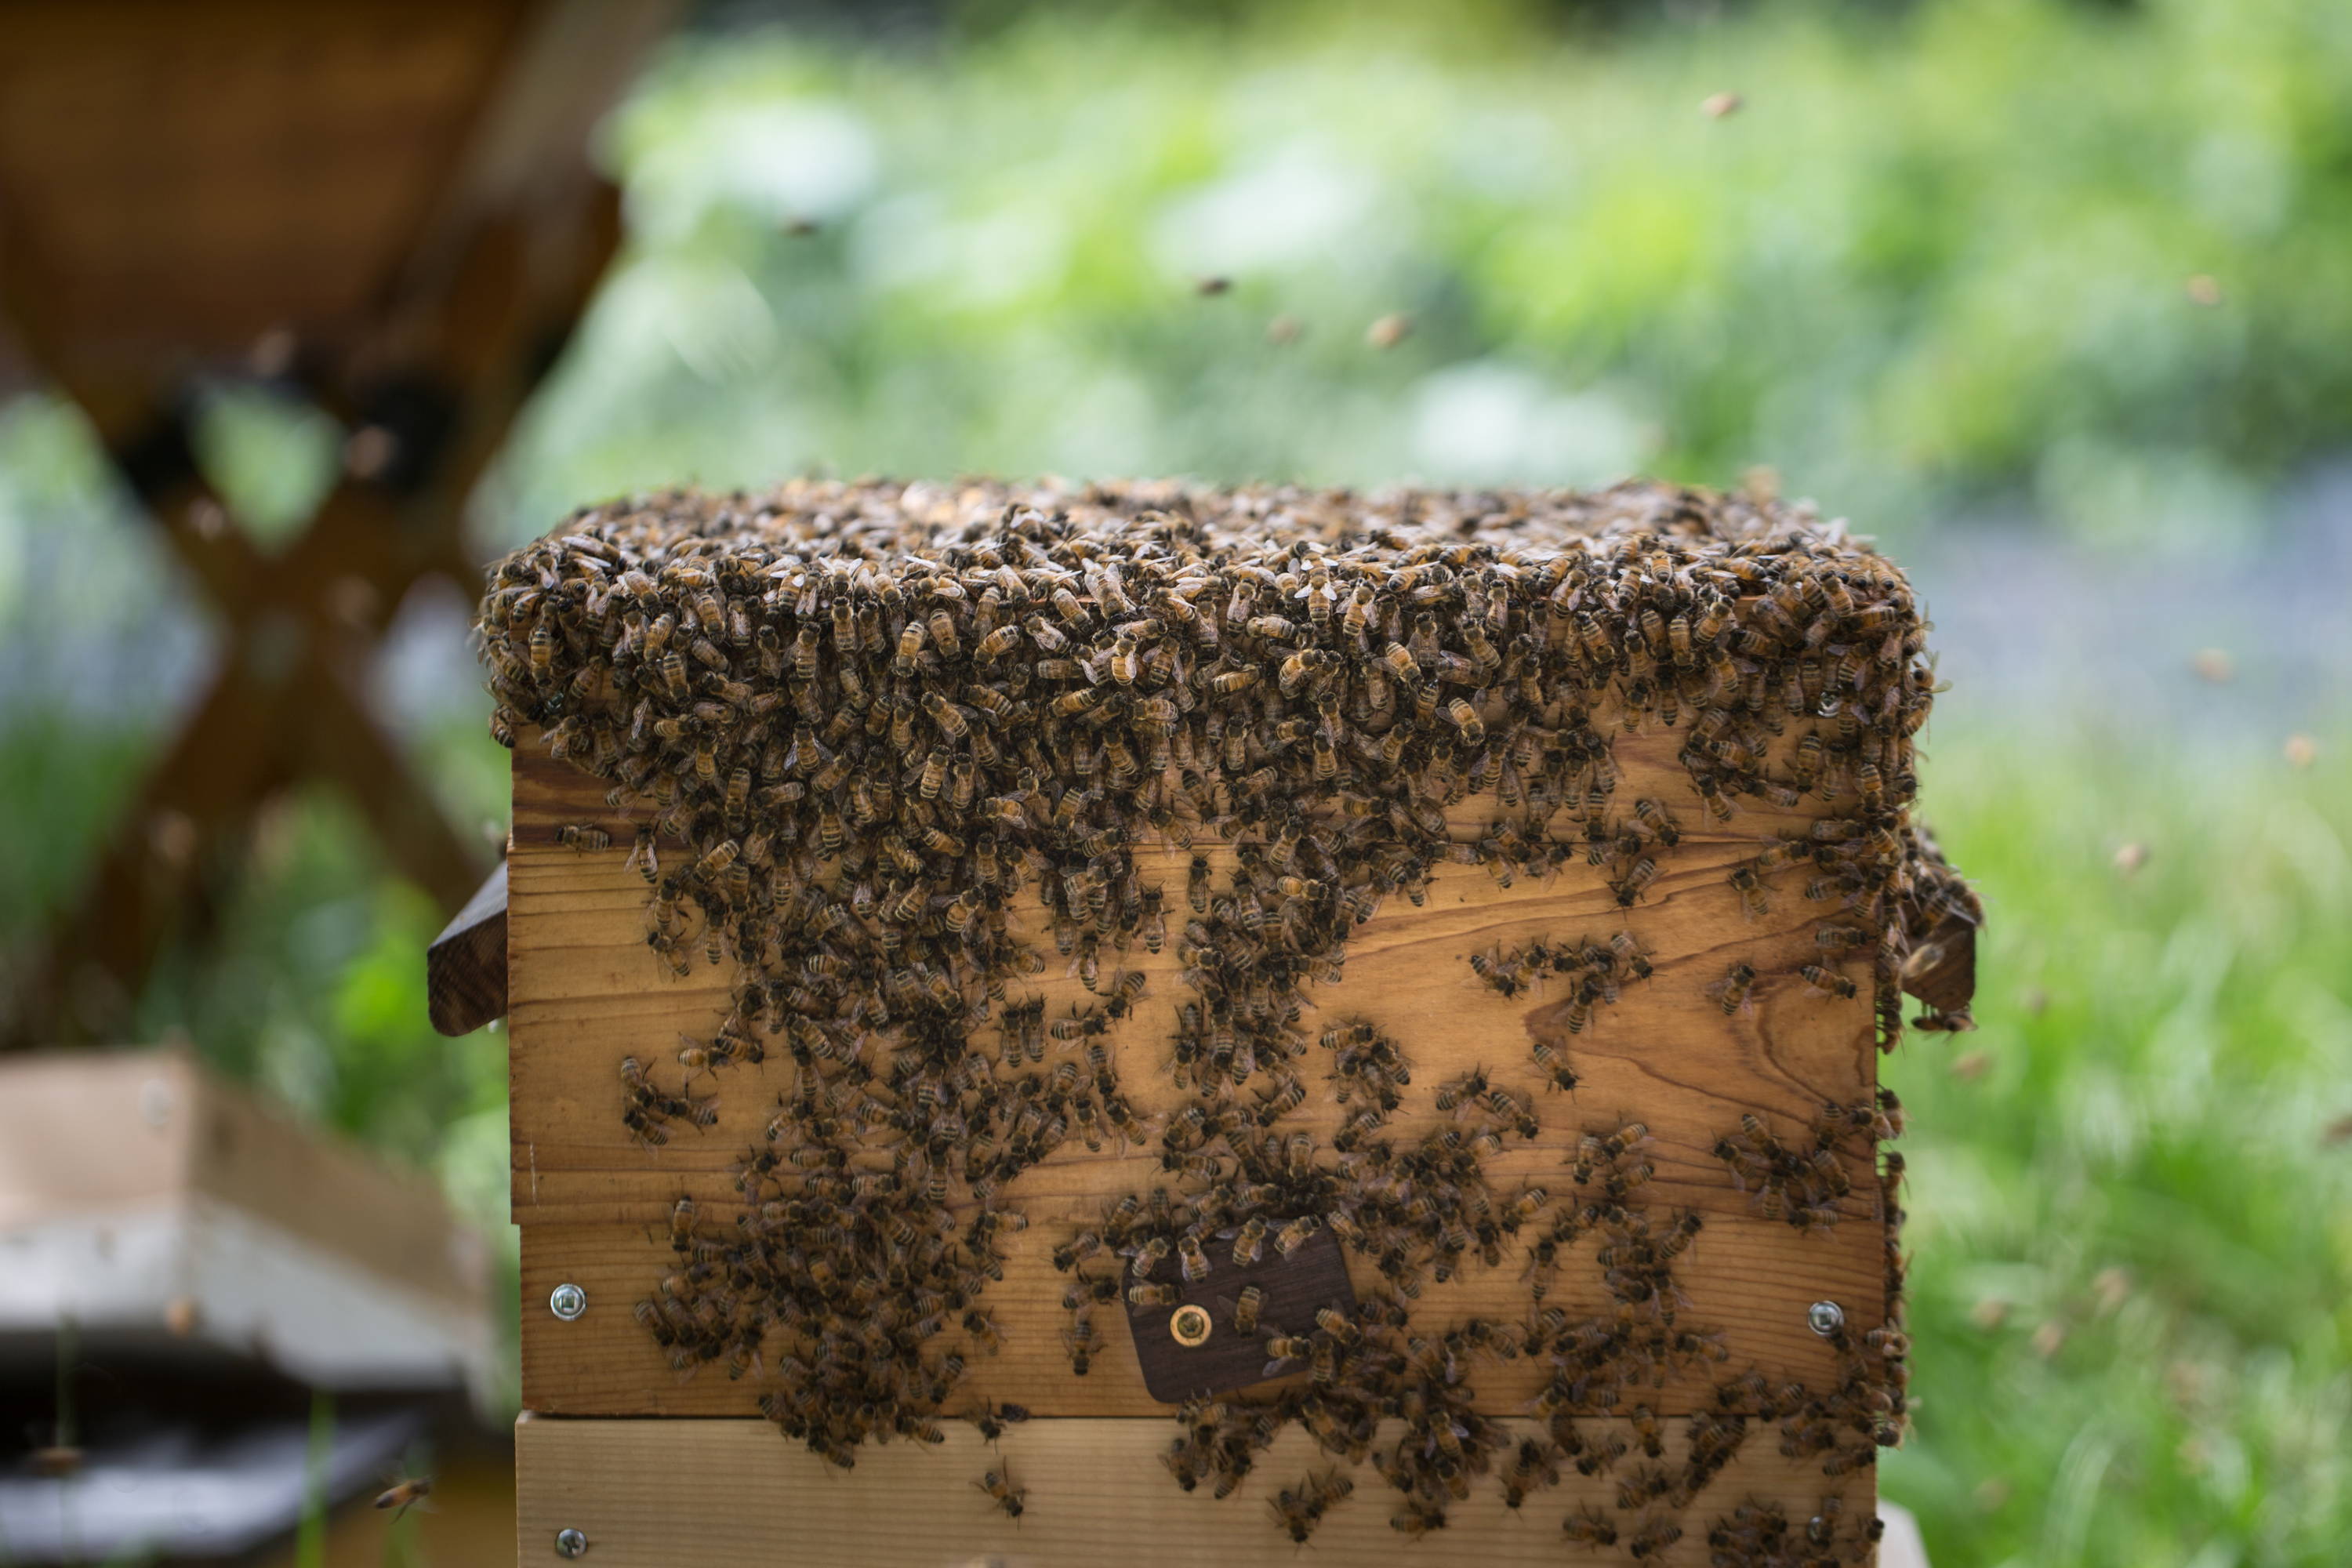 A warre hive box full of working bees